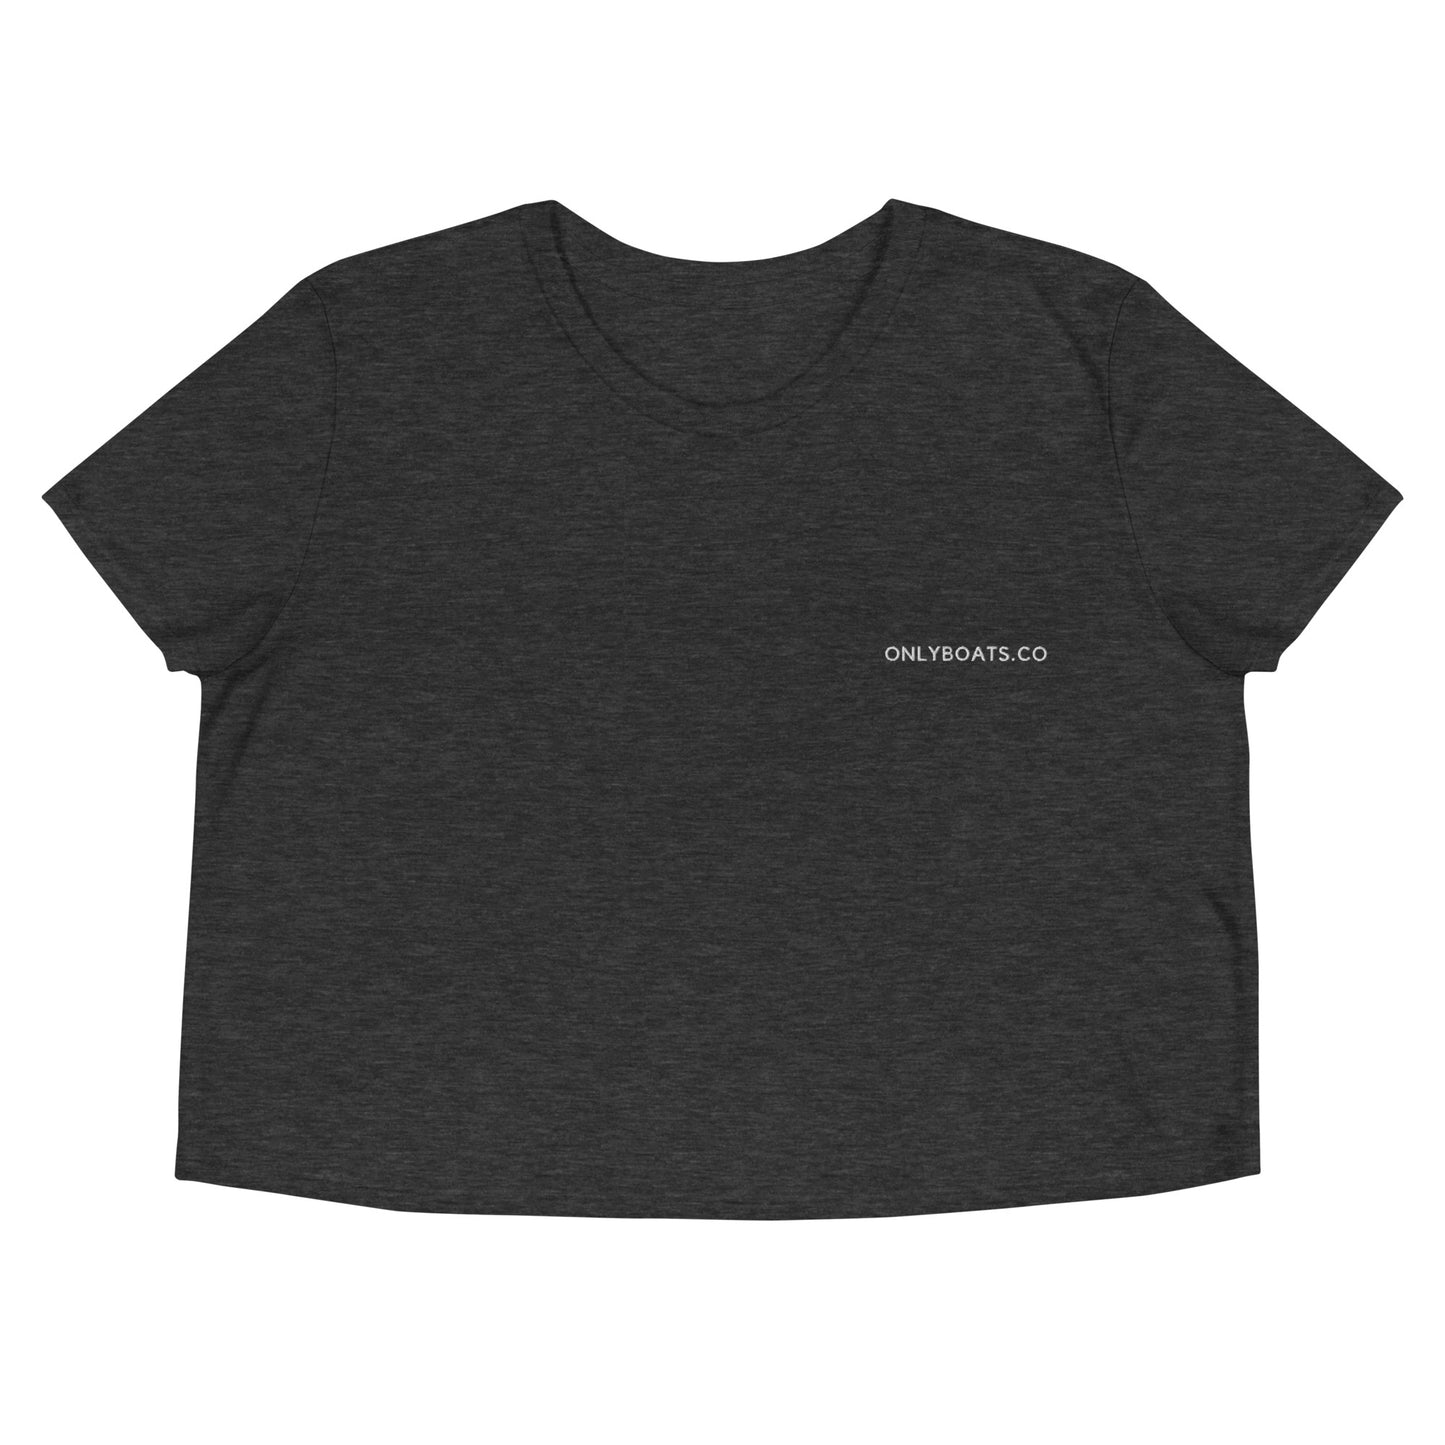 Onlyboats.co Crop Tee - ONLY BOATS